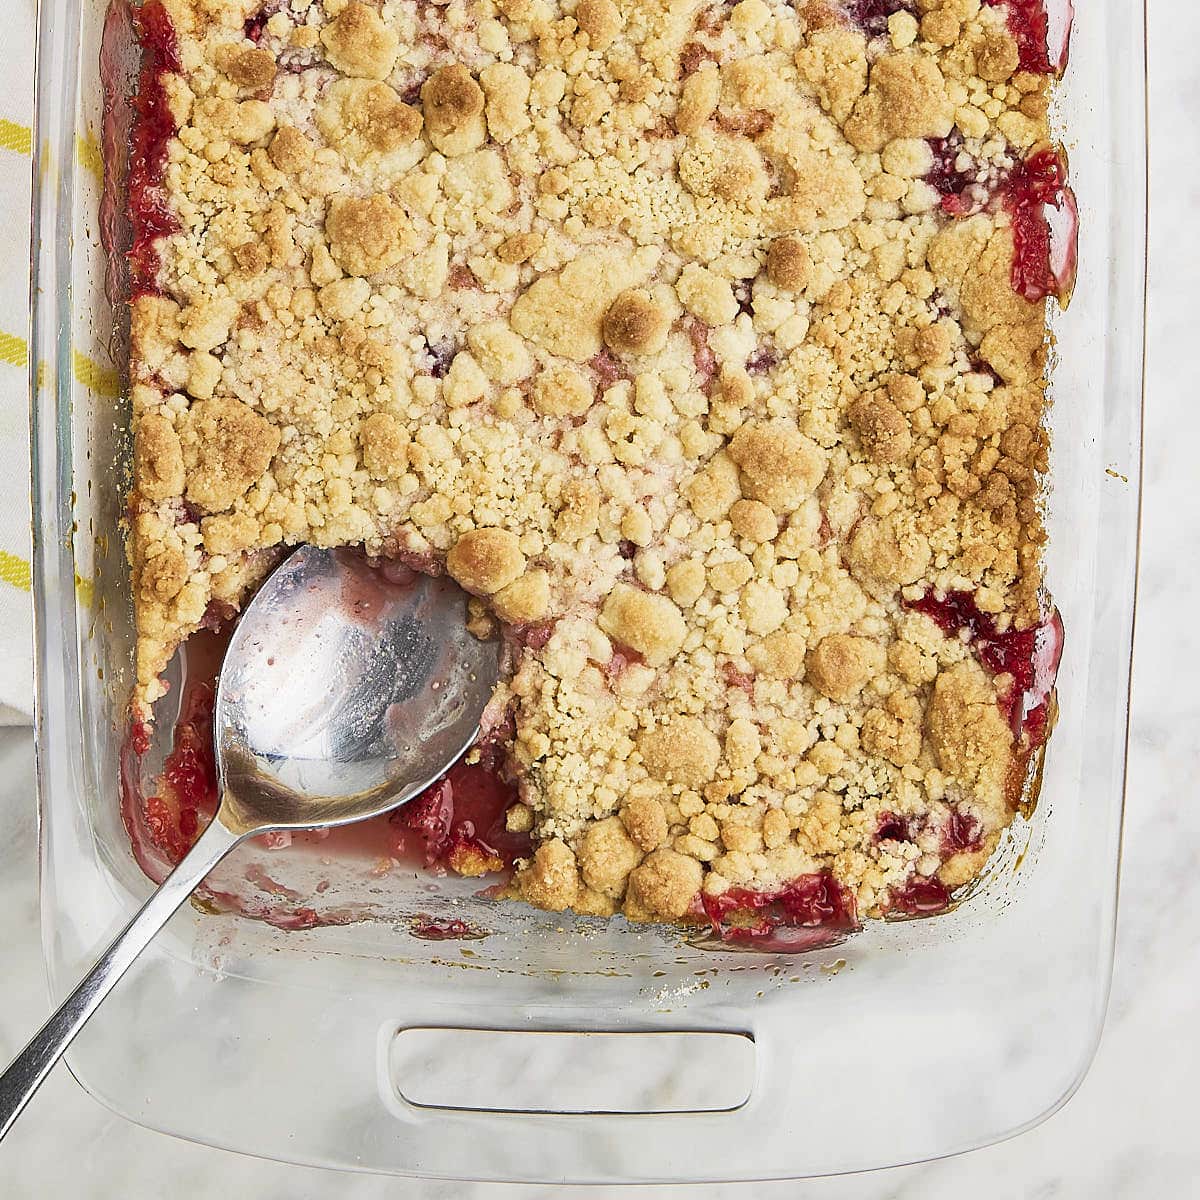 Top down view of a Strawberry Dump Cake in a baking dish with a large serving spoon.